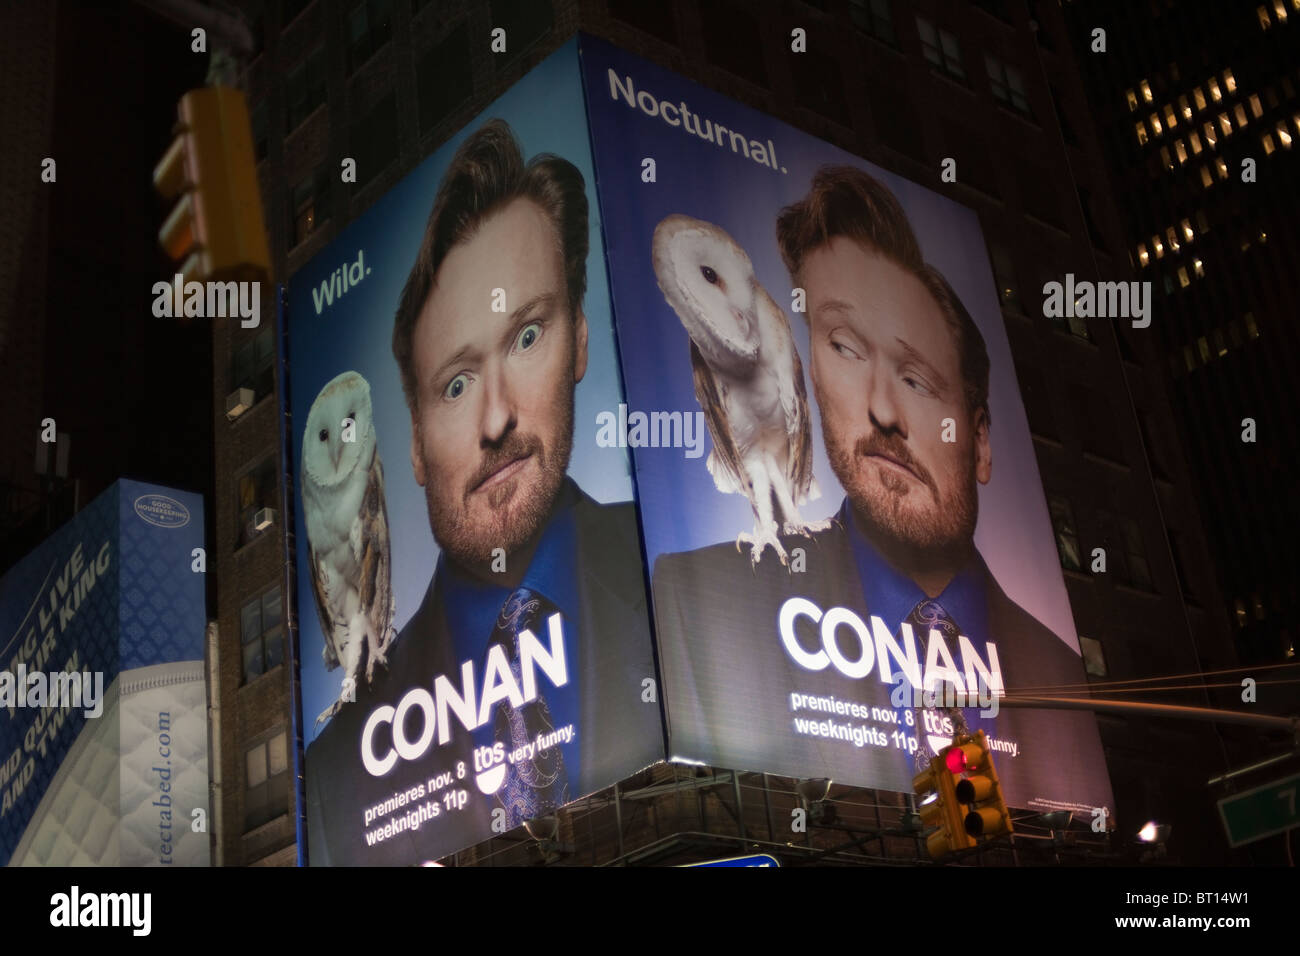 Advertising for the Conan O'Brien's new TBS talk show on a billboard in Times Square in New York Stock Photo